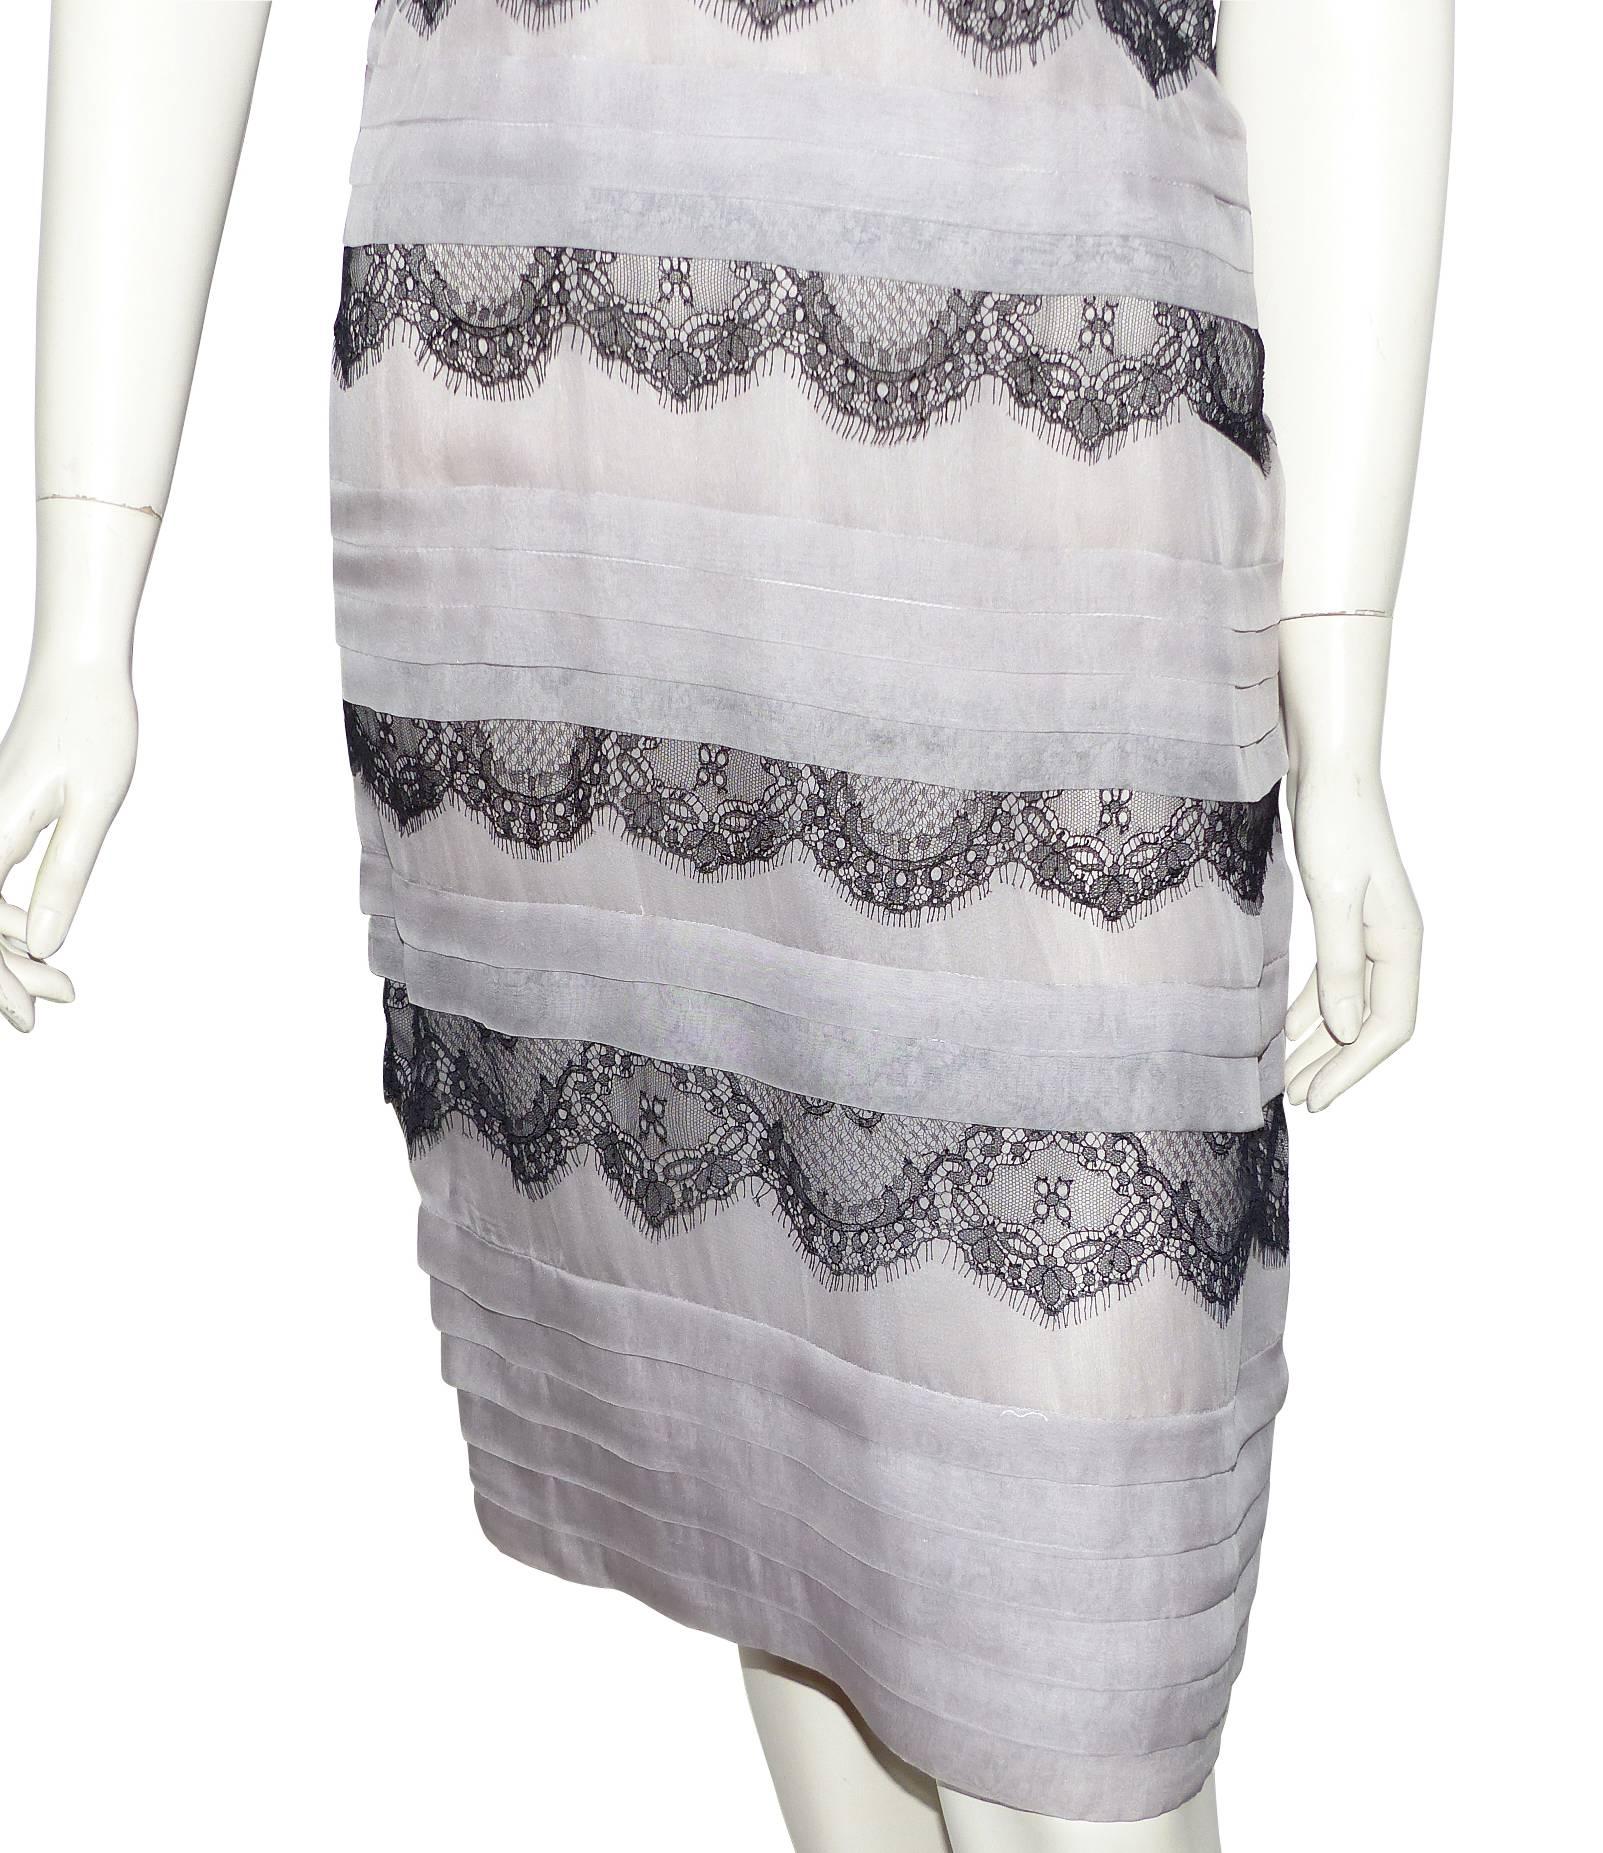 EFFET HAUTE COUTURE  Valentino Grey Silk Dress and  Black Lace  / SUBLIME  2